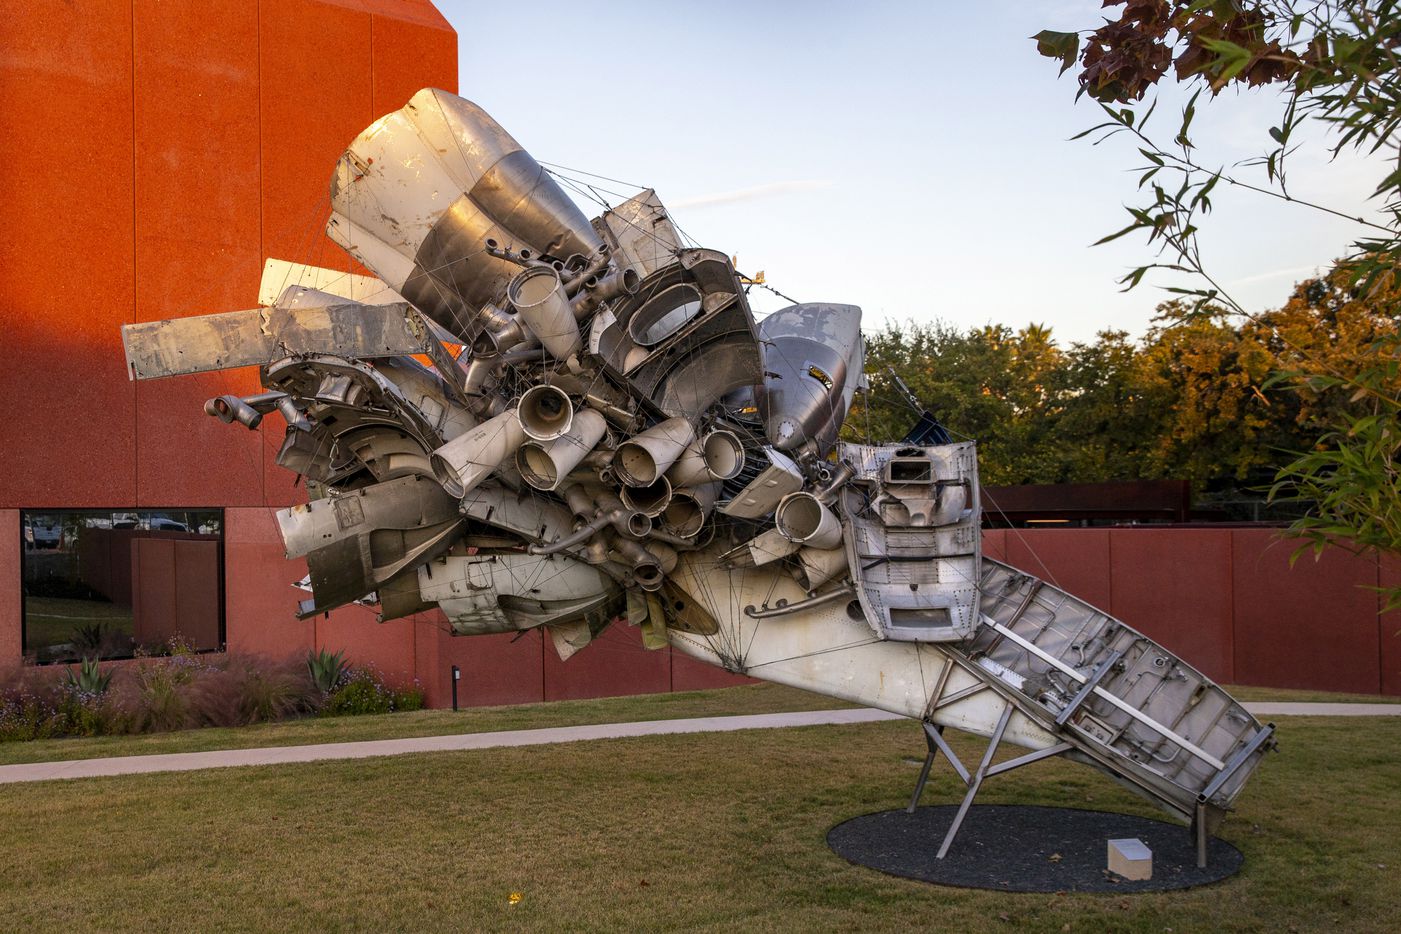 A Nancy Rubins sculpture made with mangled airplane parts is featured in the enclosed...